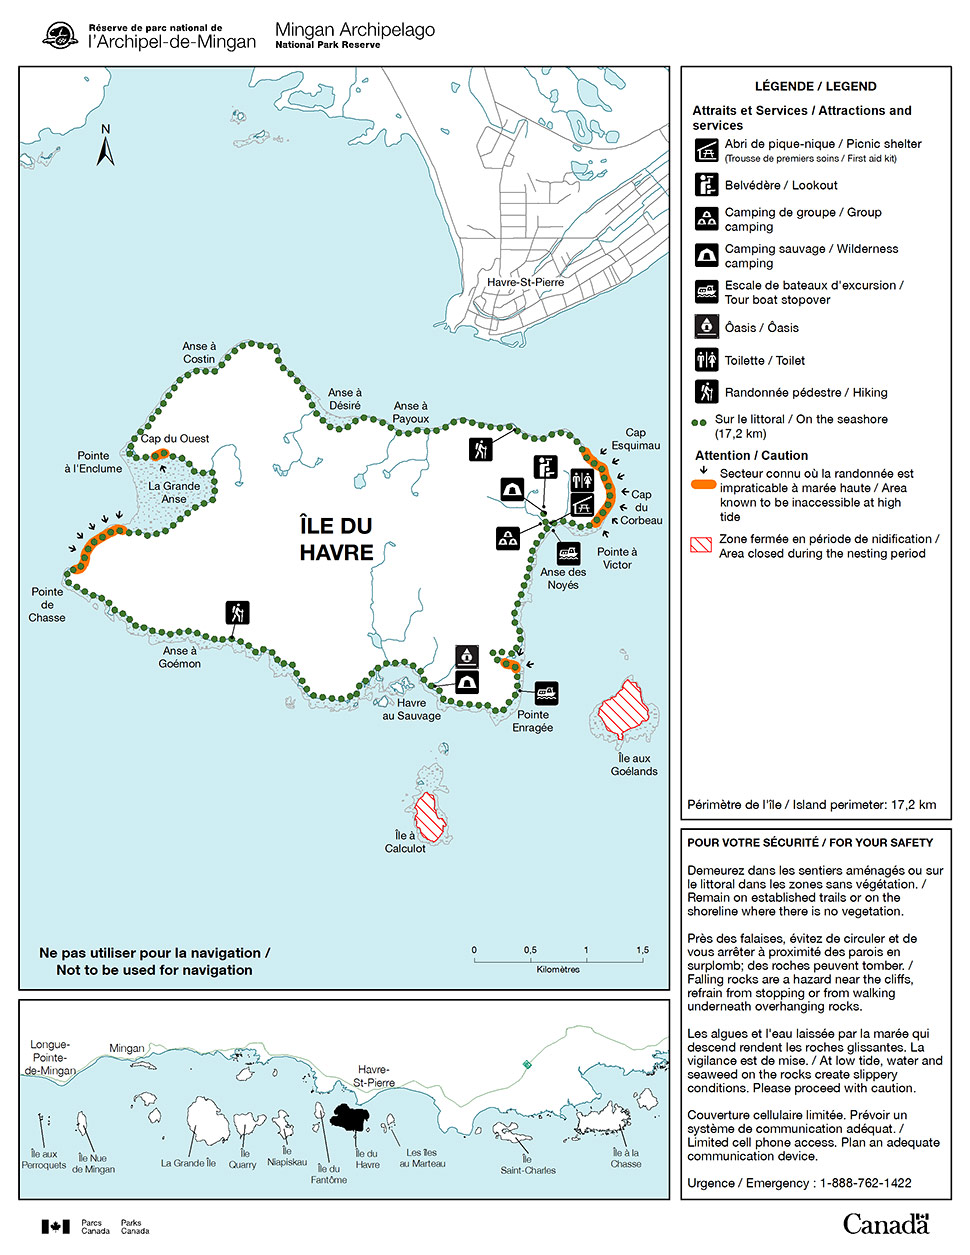 Trails and facilities found on île du Havre